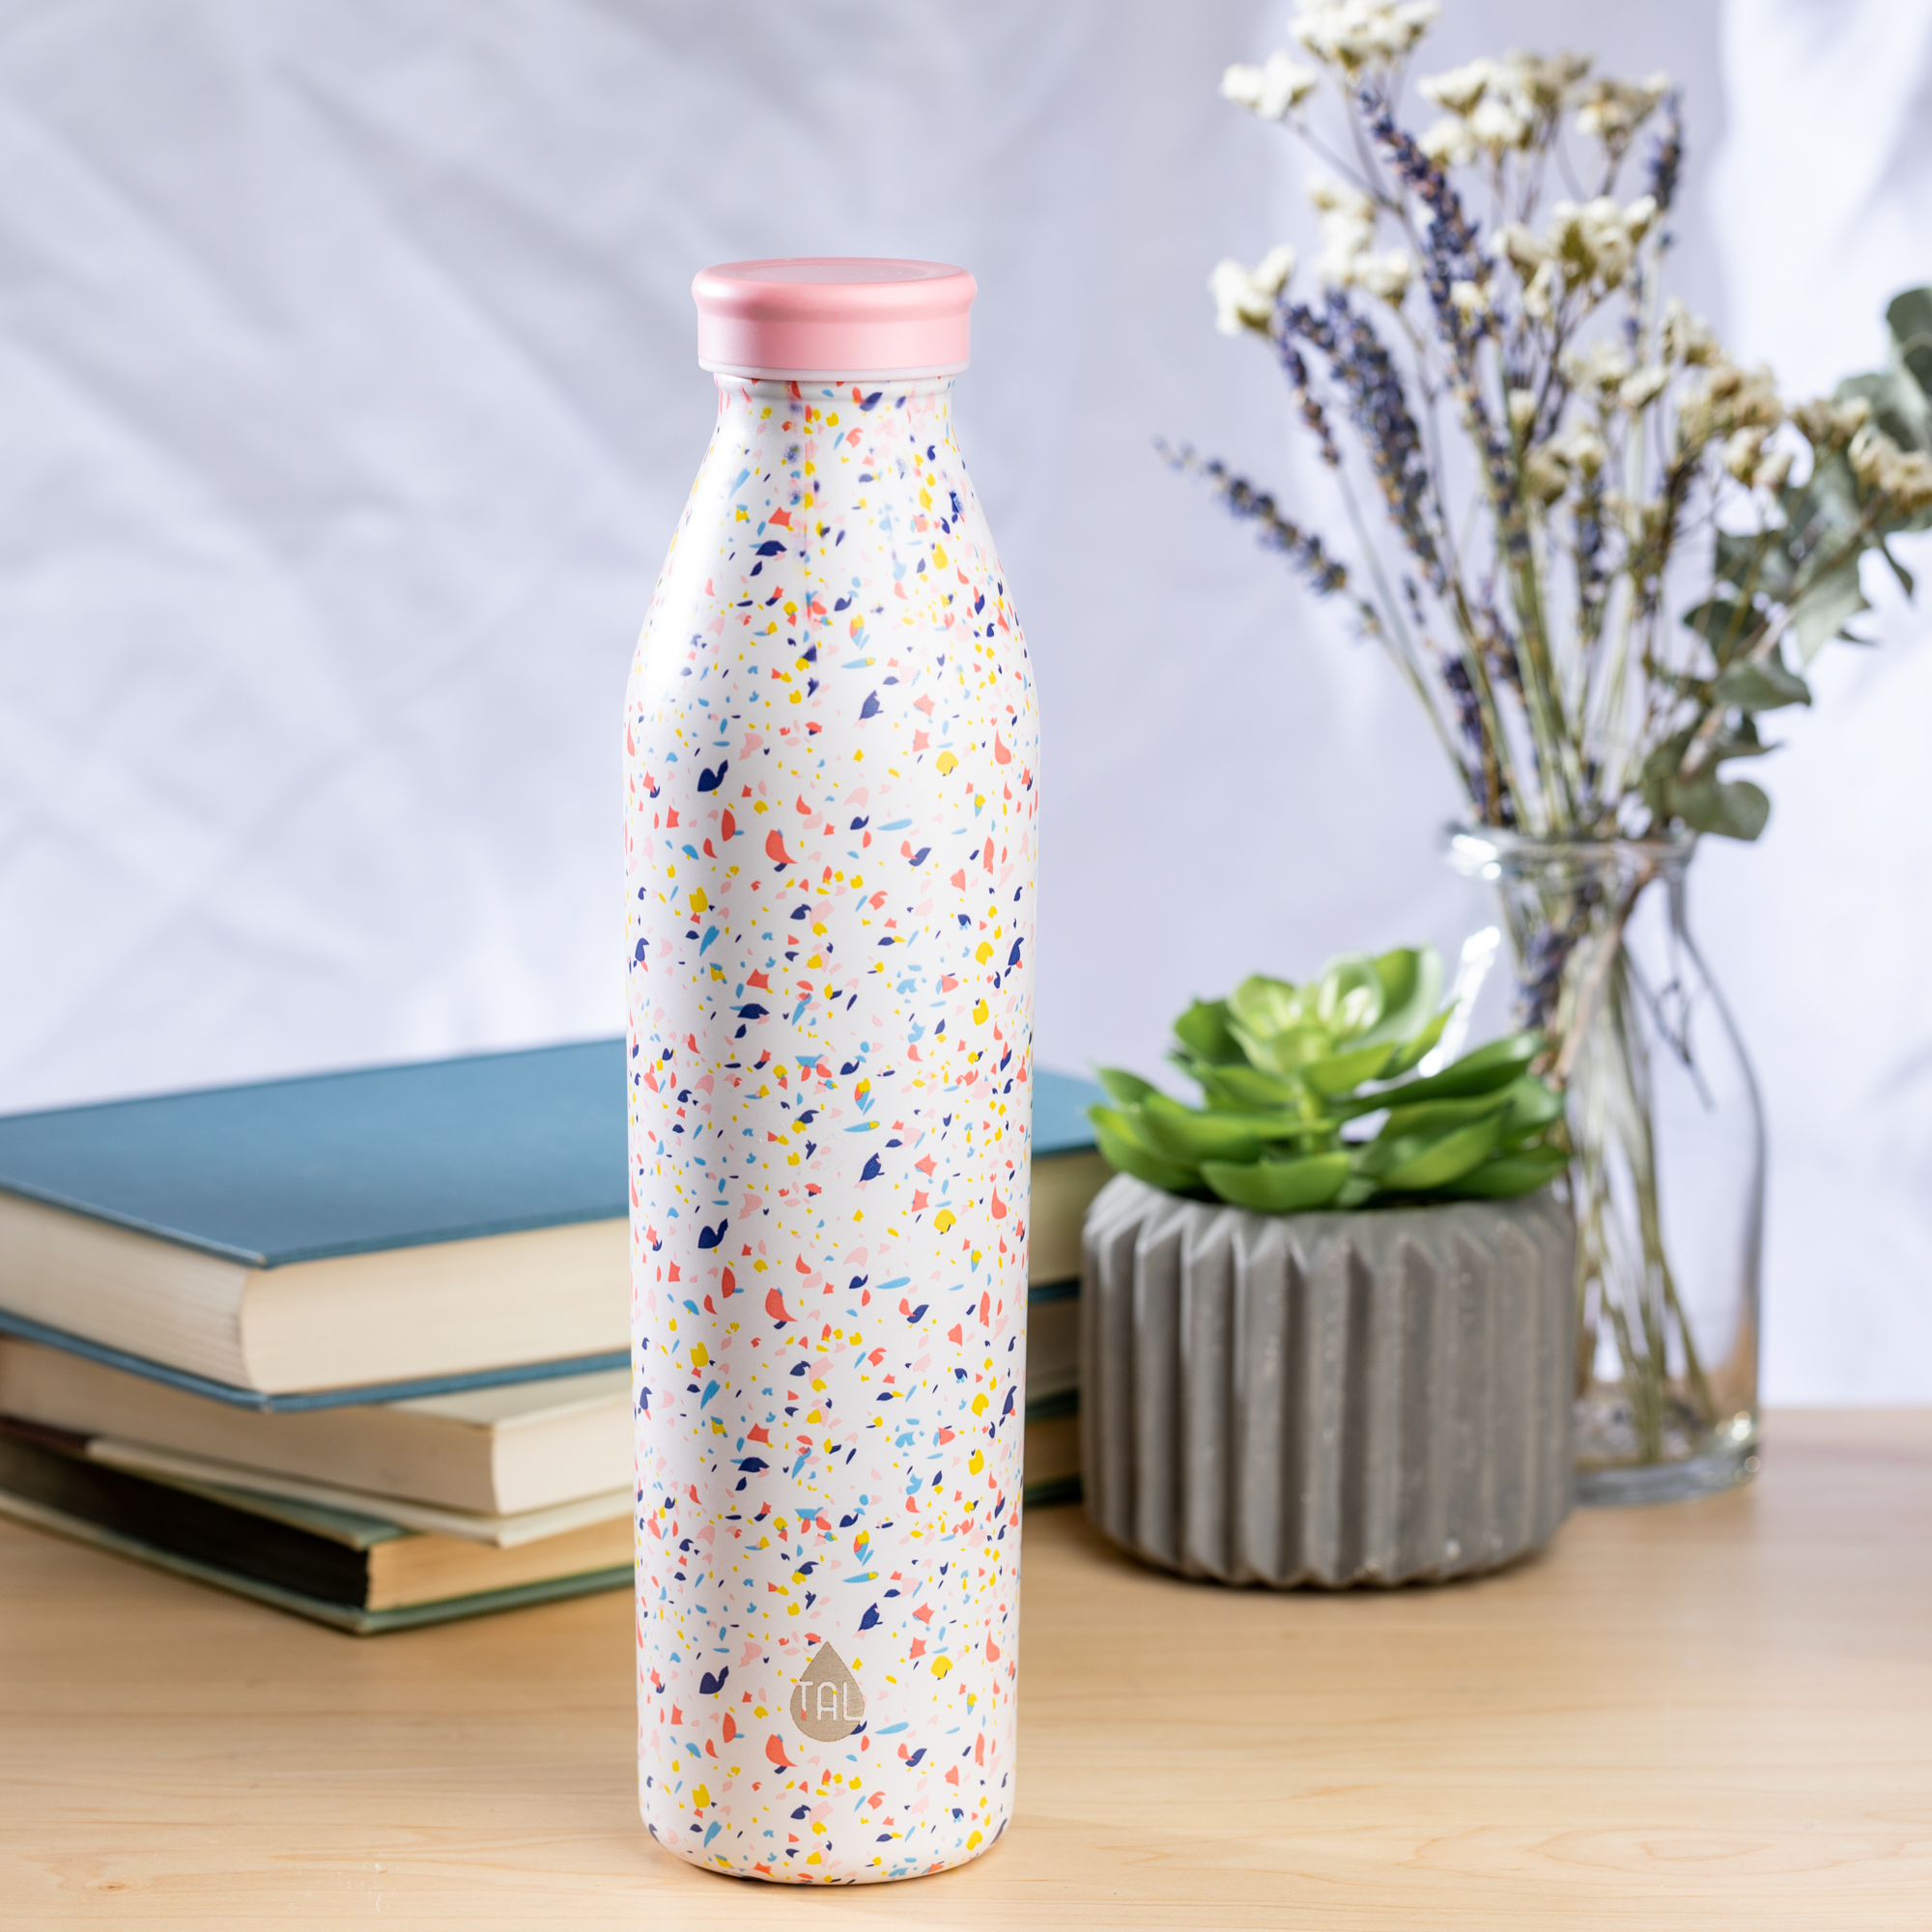 TAL Stainless Steel Water Bottle, 20 fluid ounces, Confetti - image 4 of 5